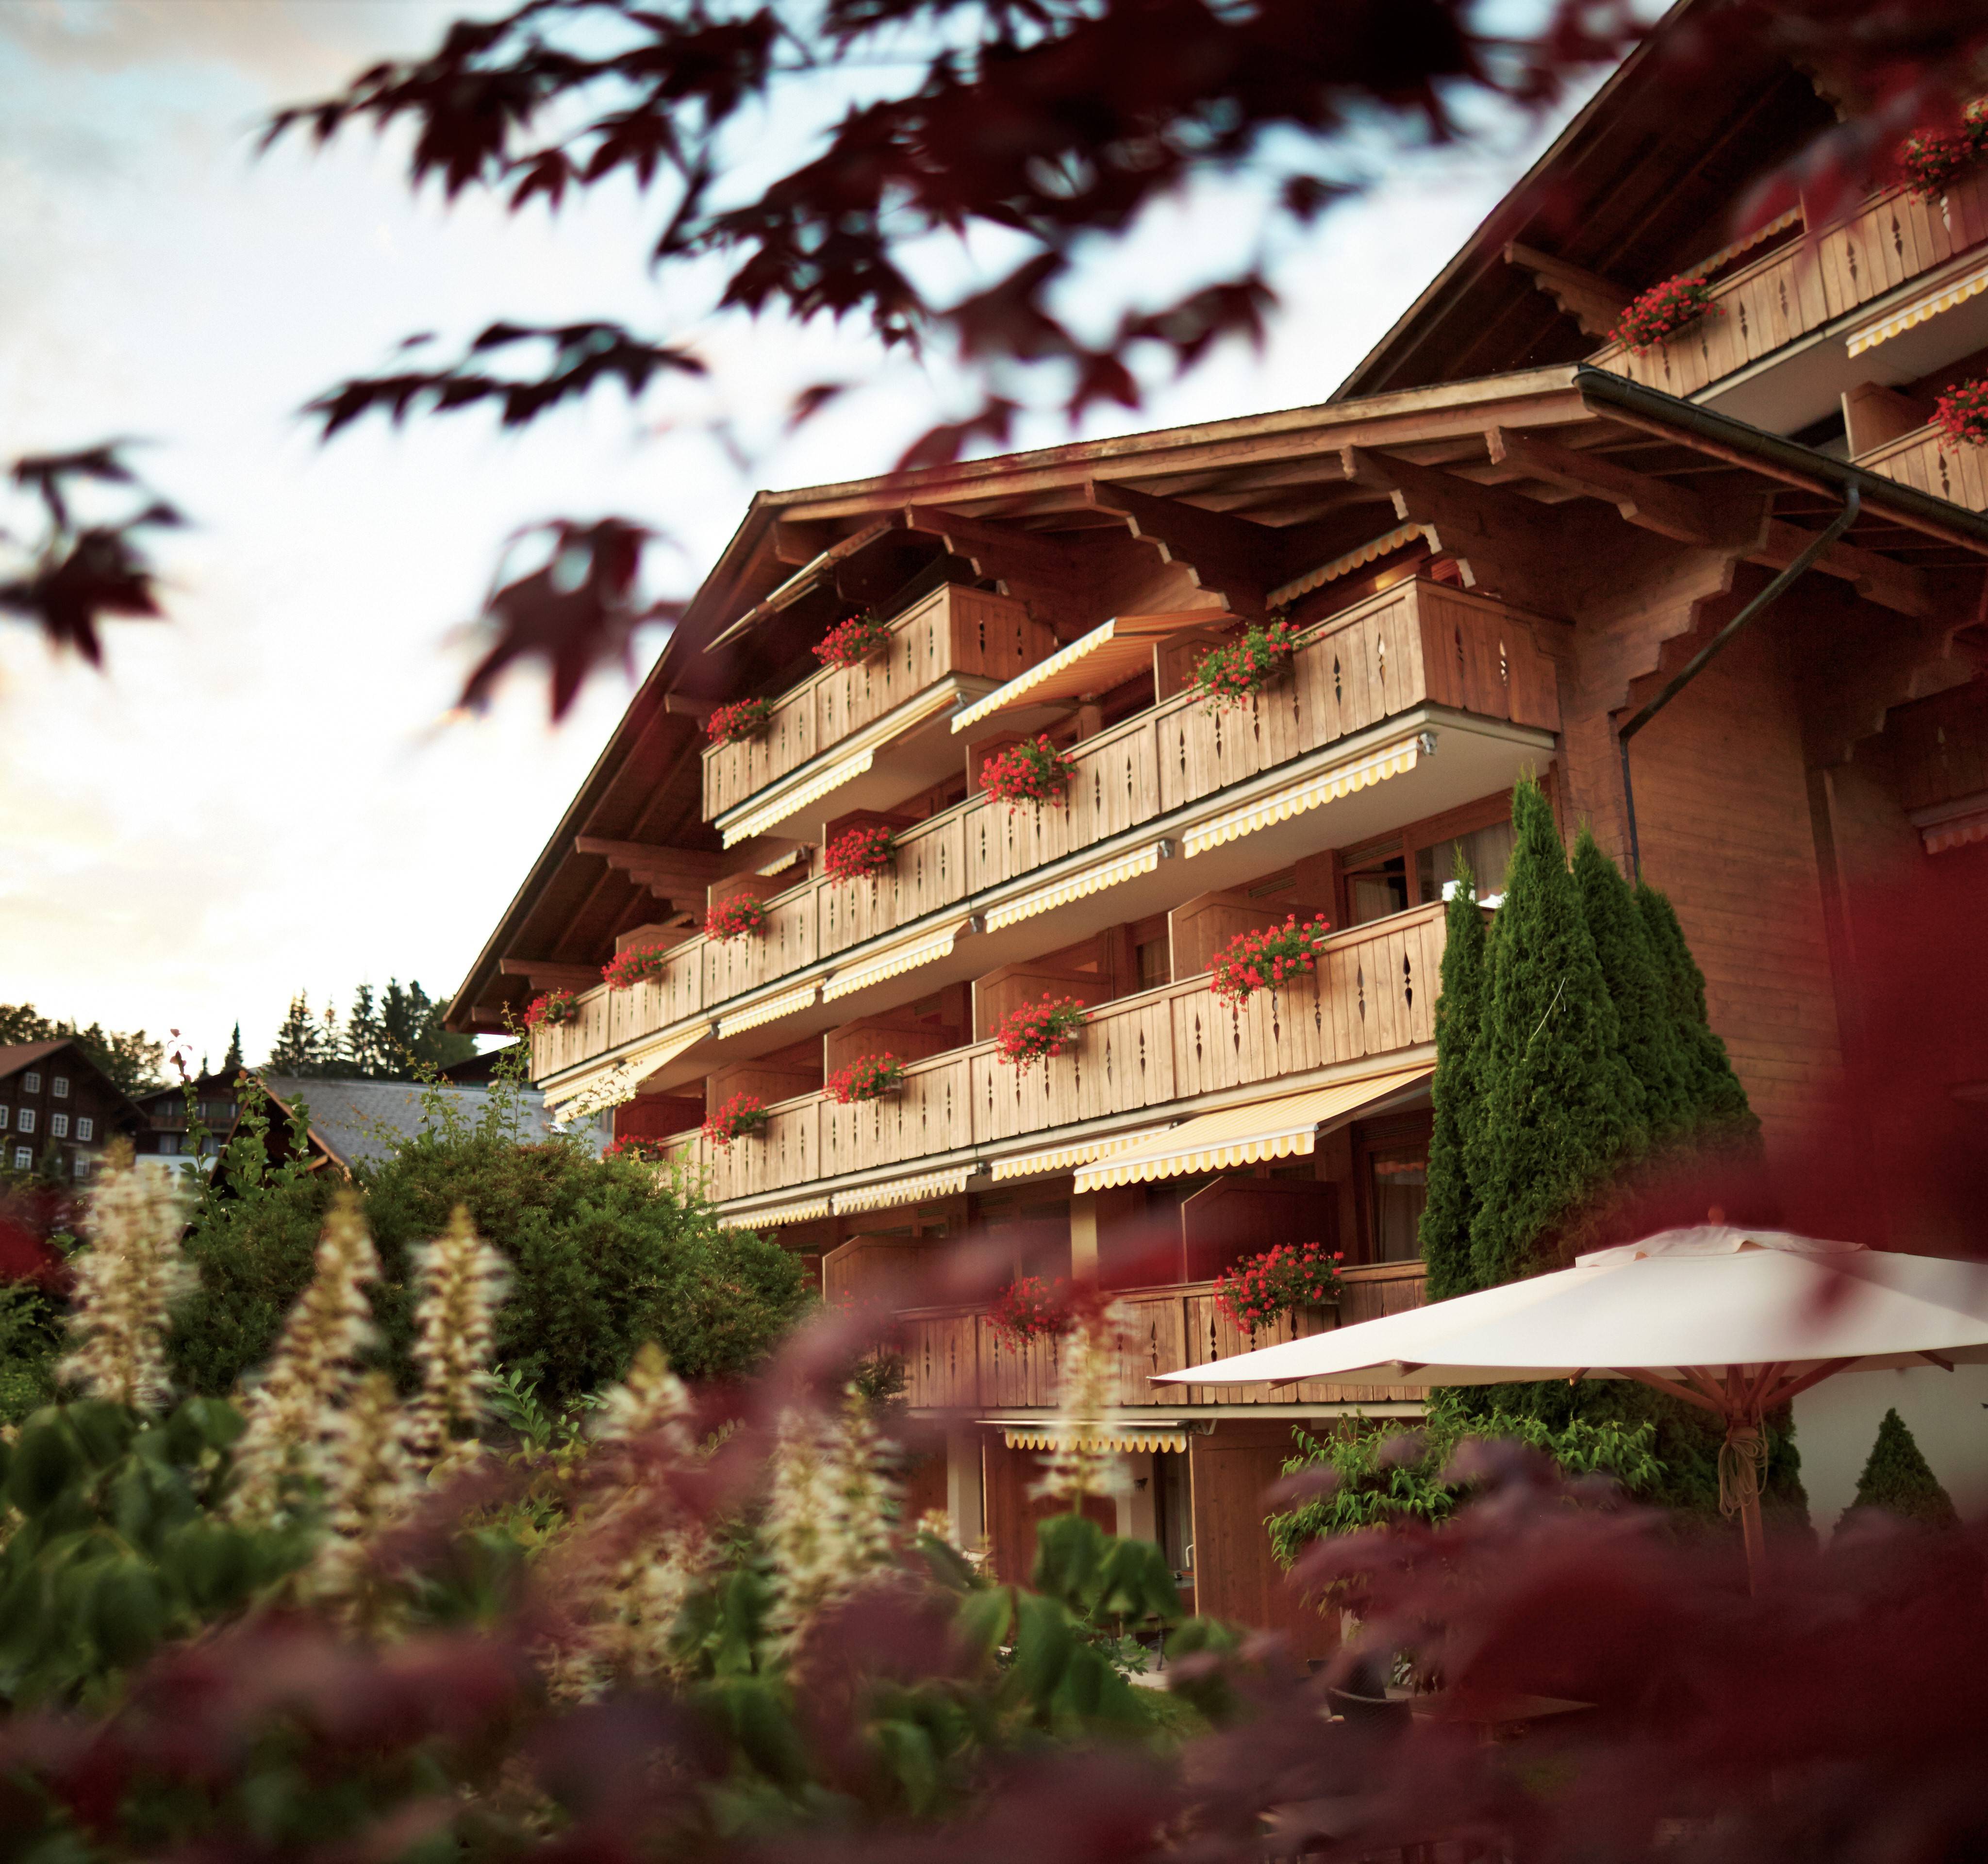 In the heart of Gstaad - Hotel Gstaaderhof